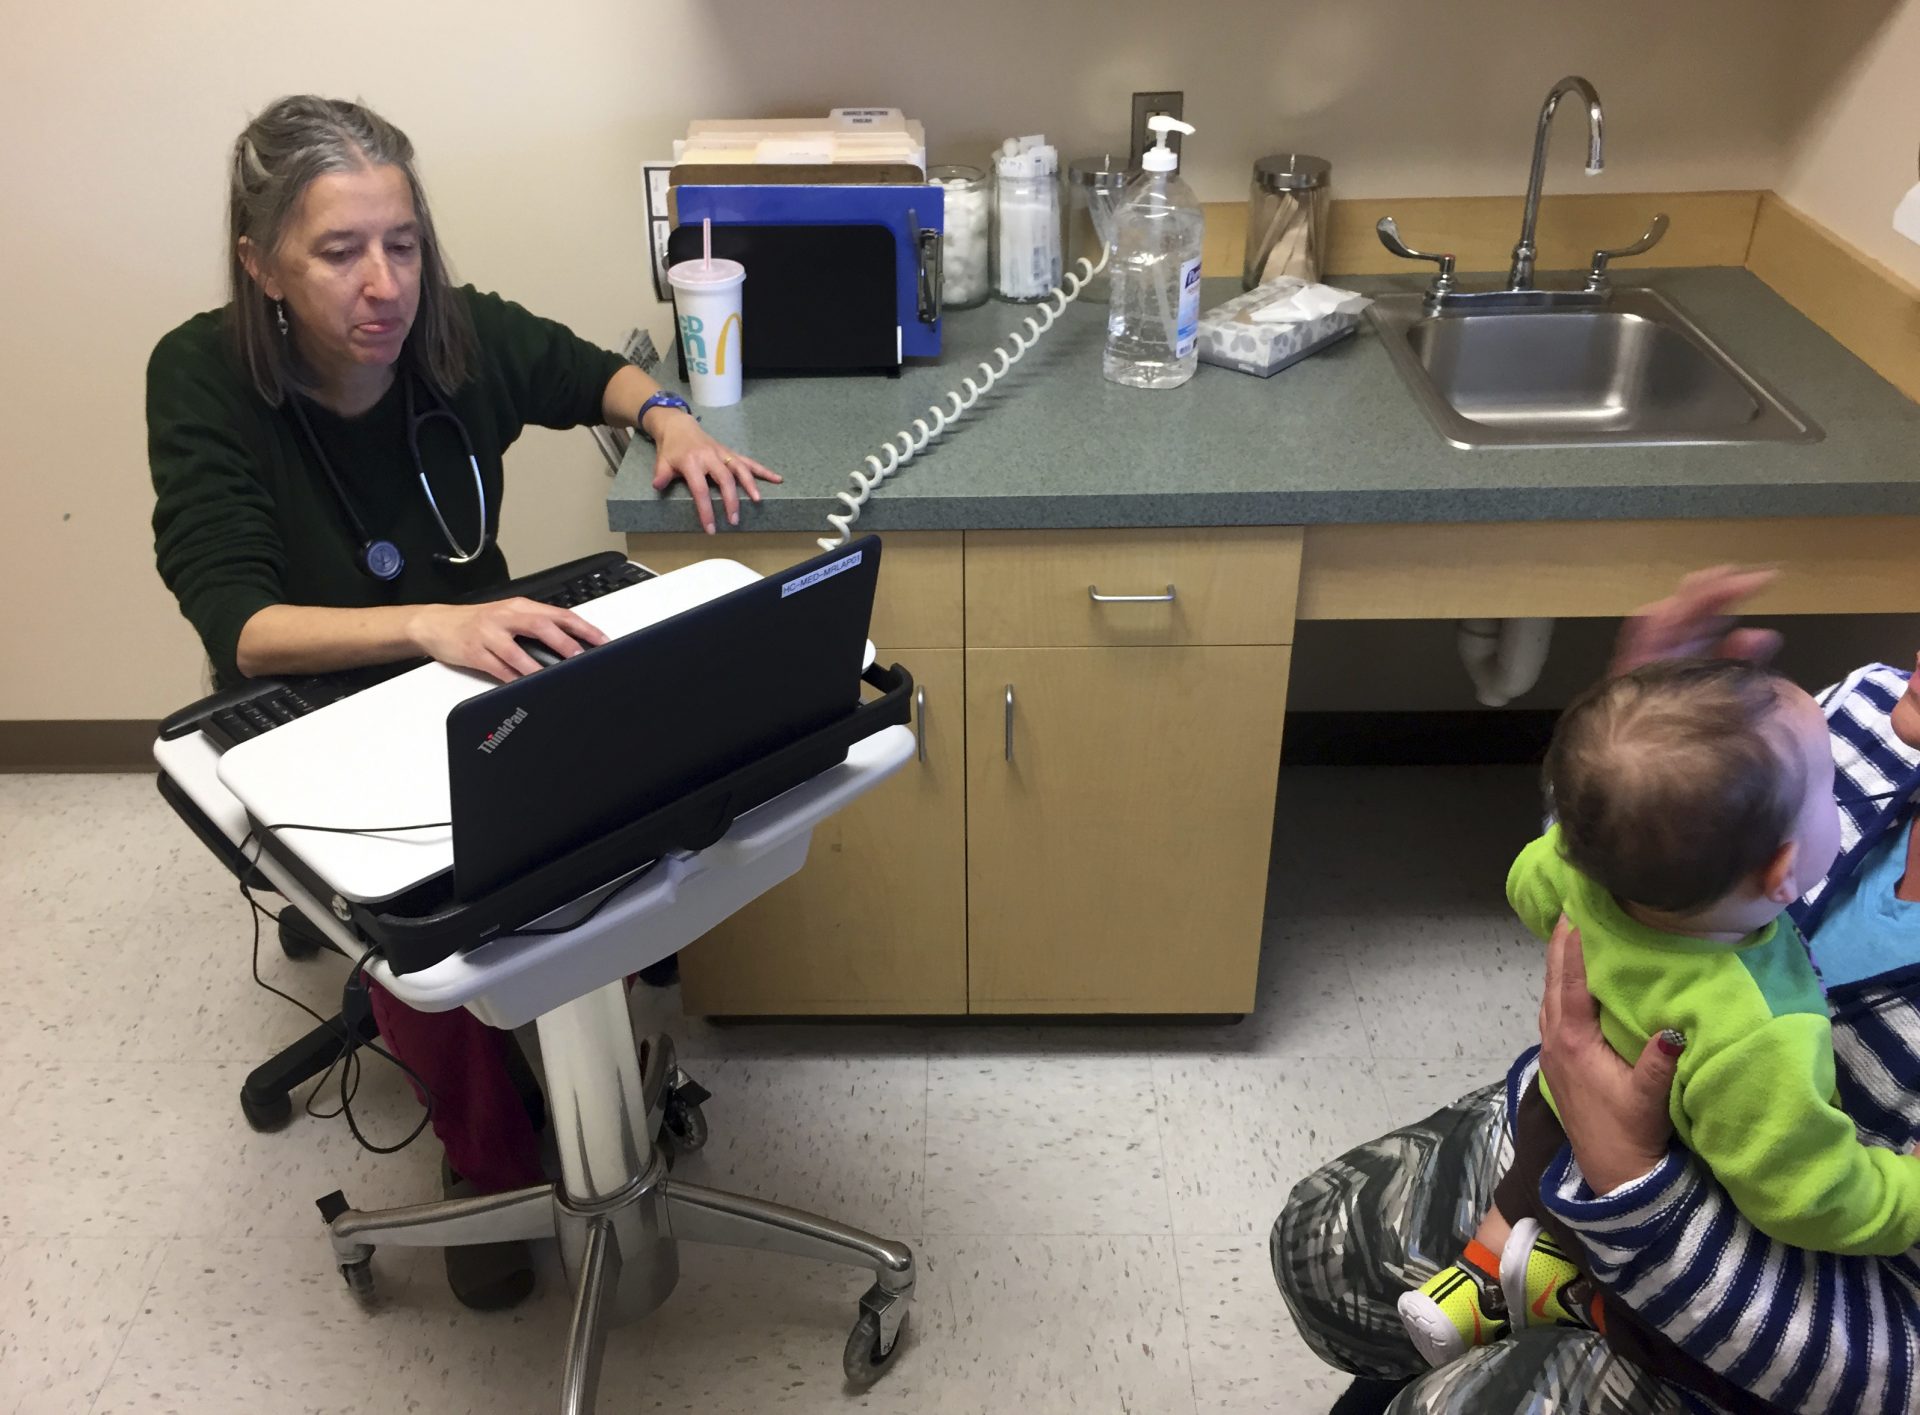 In this Dec. 21, 2016 photo, family physician Leslie Hayes attends to a 31-year-old mother (right, partially obscured) who is being treated for an addiction to heroin with the anti-craving medication Subutext, at the El Centro Family Health medical clinic in Espanola, N.M. Hayes credits her ability to effectively treat opioid addiction disorders to a training and mentoring program known as Project ECHO that is being tapped by federal officials for possible broader applications.